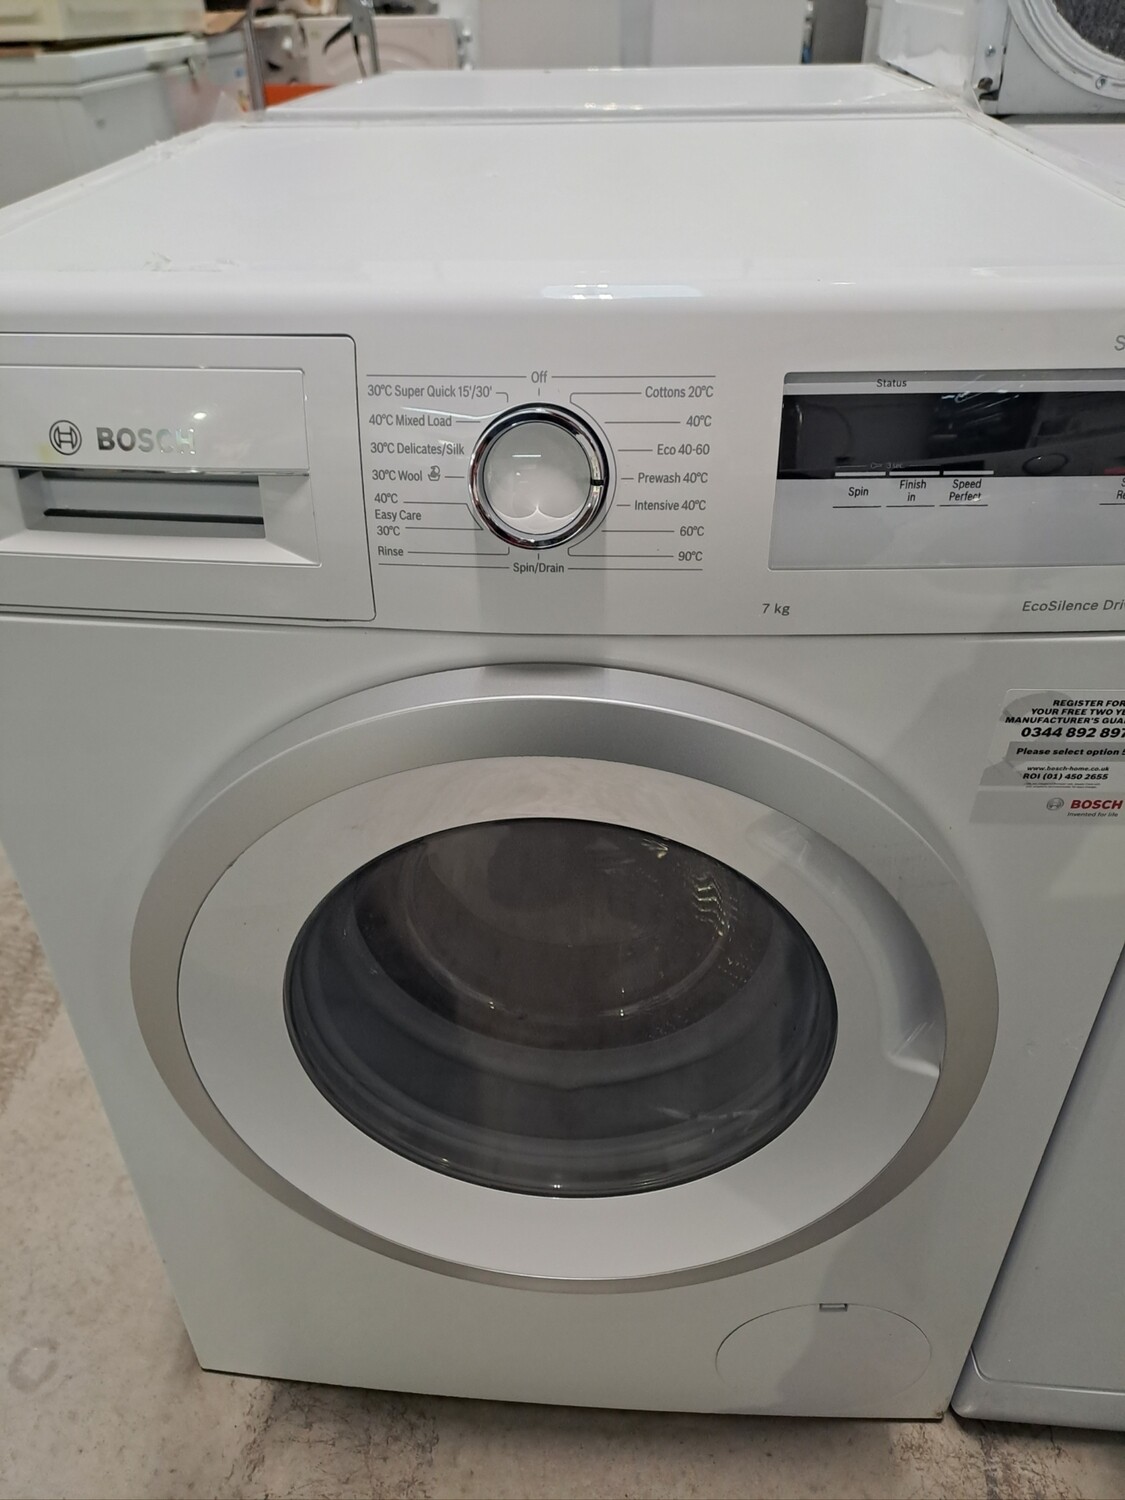 Bosch Serie 4 WAN28081GB/46 7kg Load 1400 Spin Washing Machine - White - Refurbished 6 Month Guarantee. This item is located in our Whitby Road Shop 